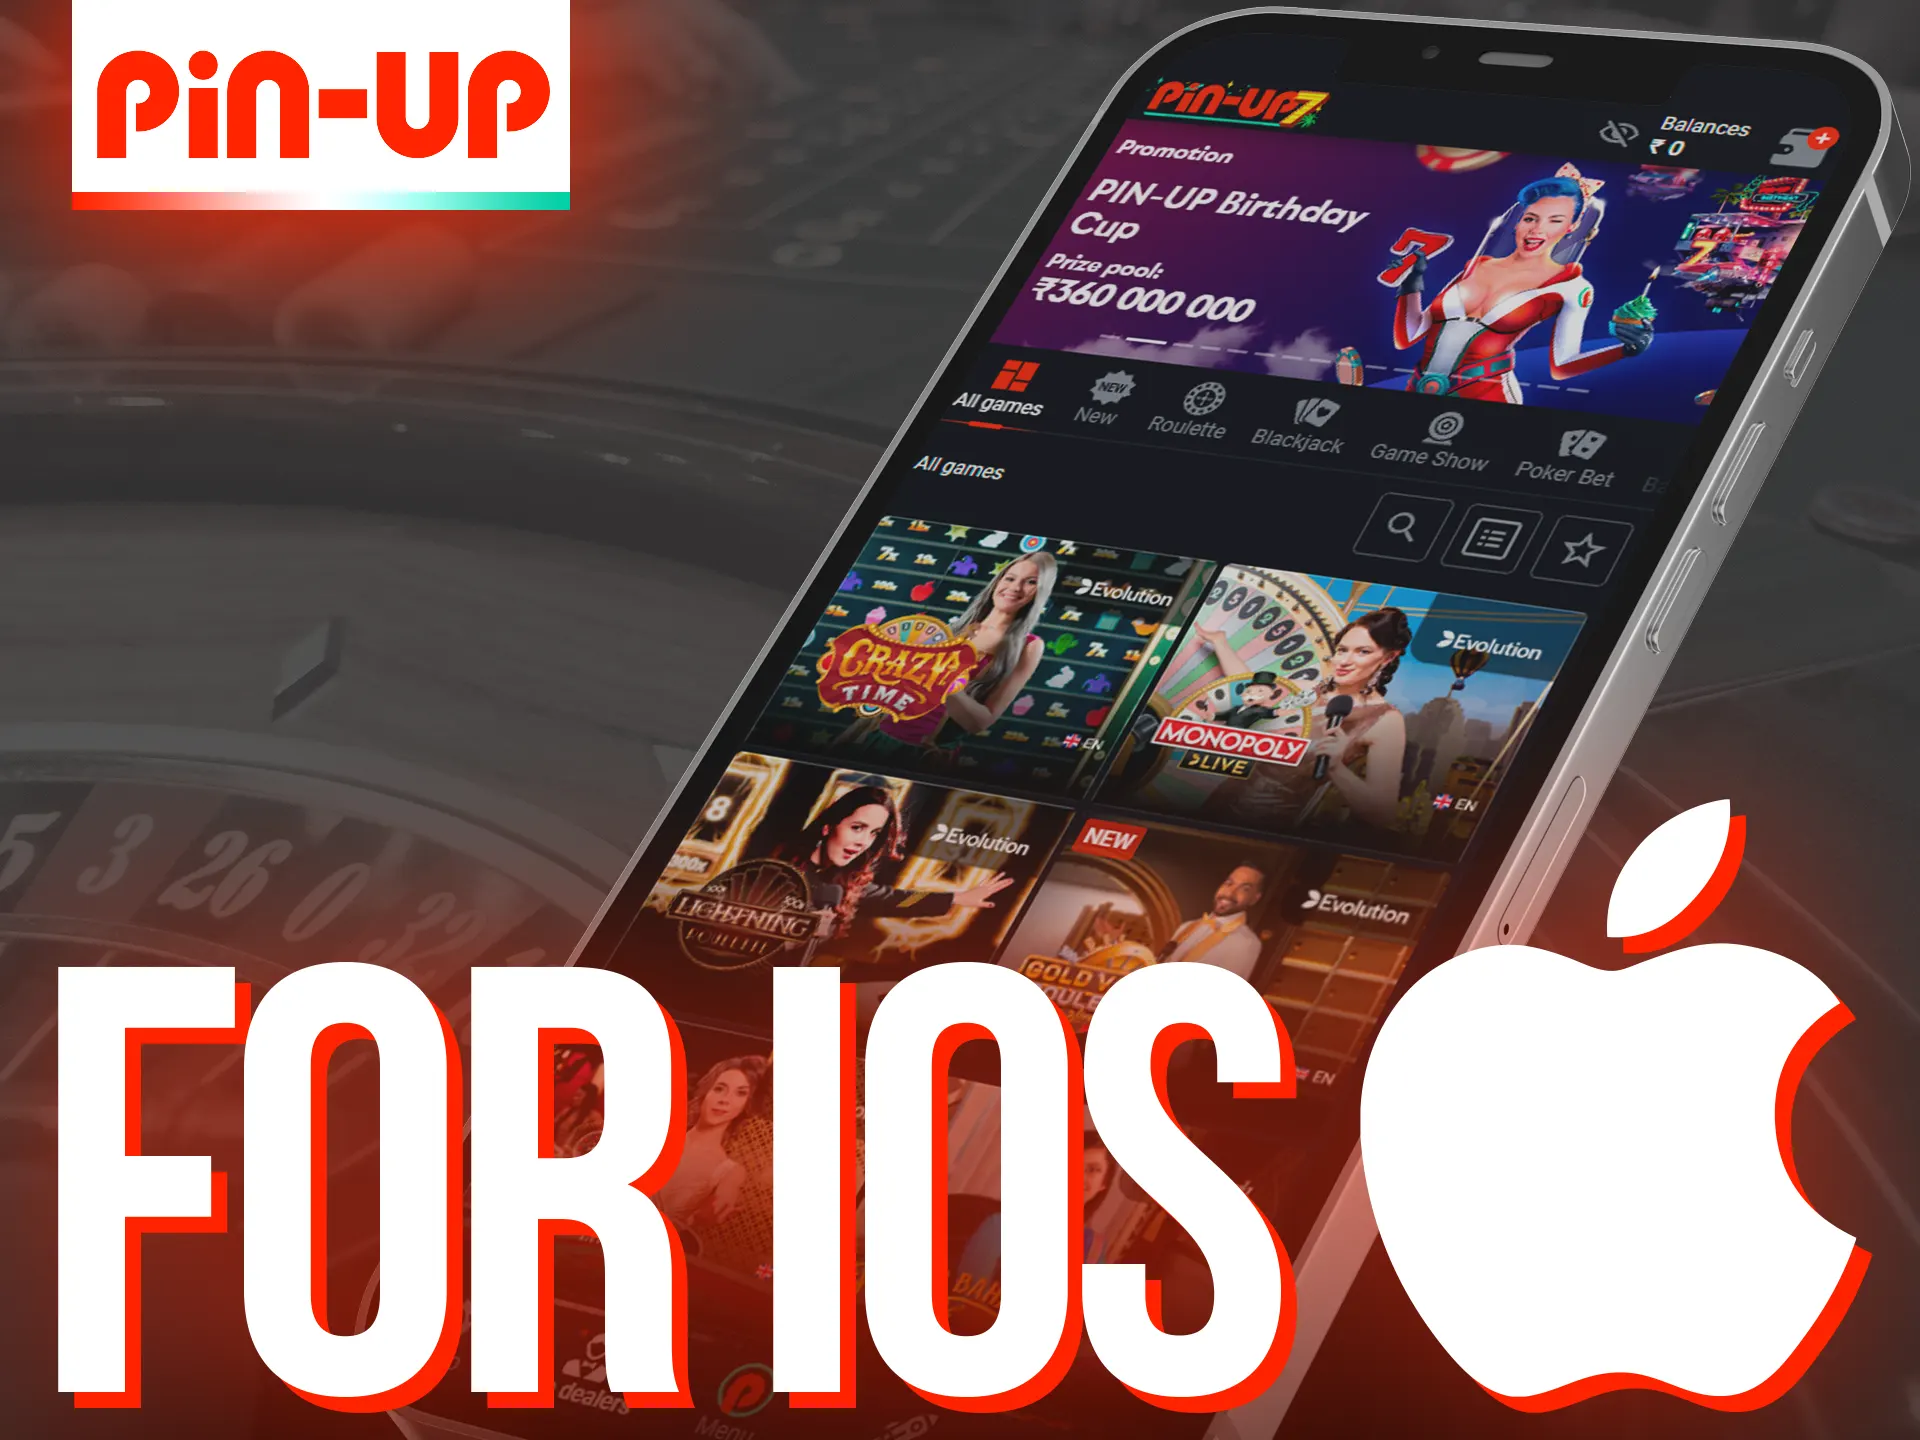 Play online casino Pin-Up from your iOS device.